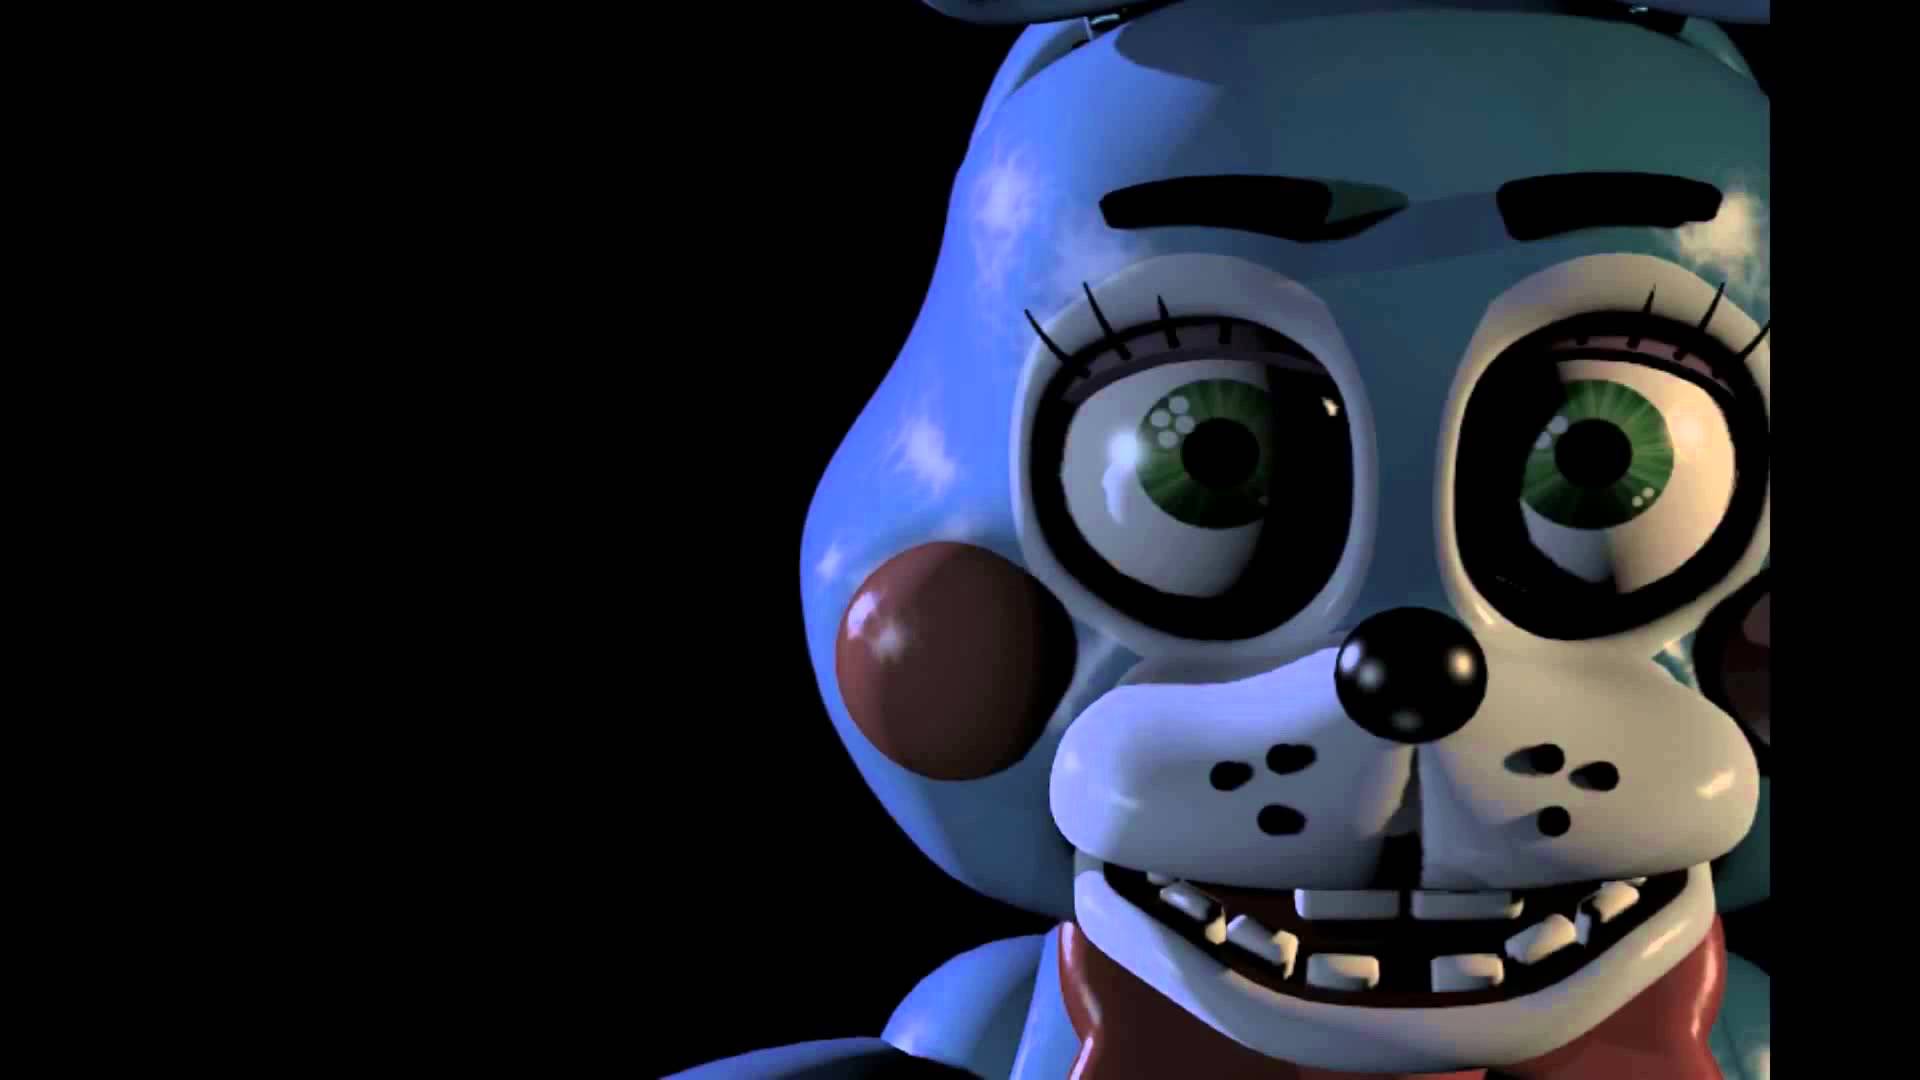 Free Download Five Nights At Freddys 2 Offical Trailer 1080P Hd